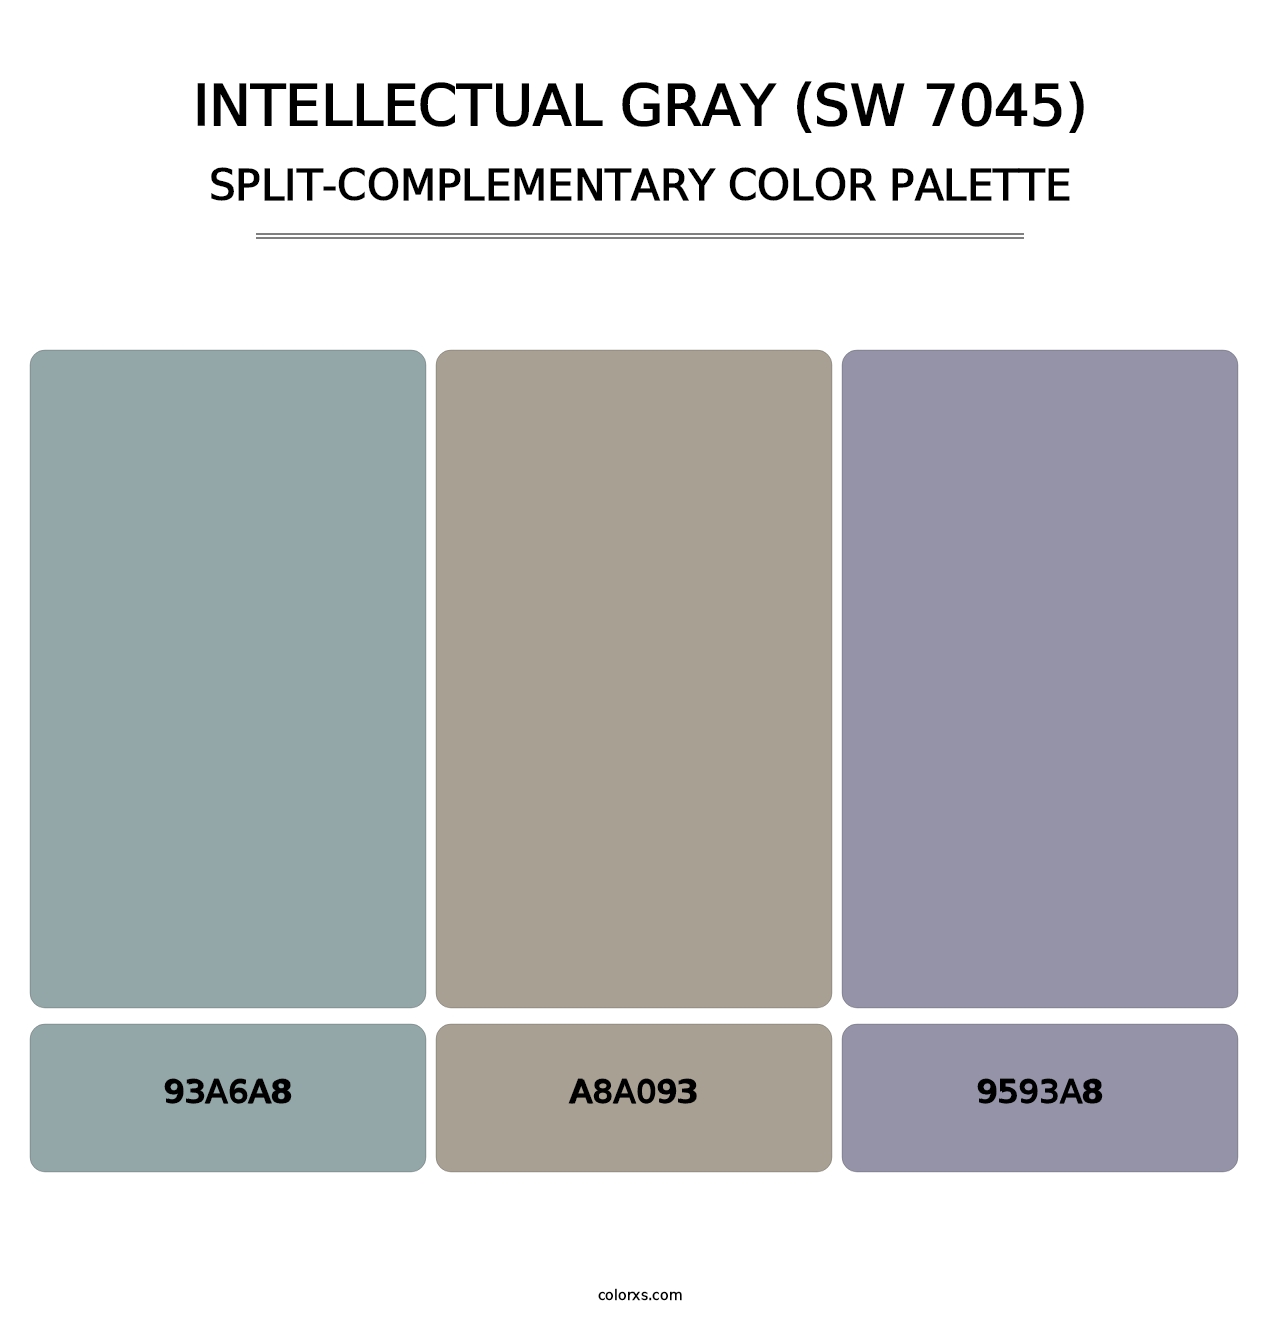 Intellectual Gray (SW 7045) - Split-Complementary Color Palette